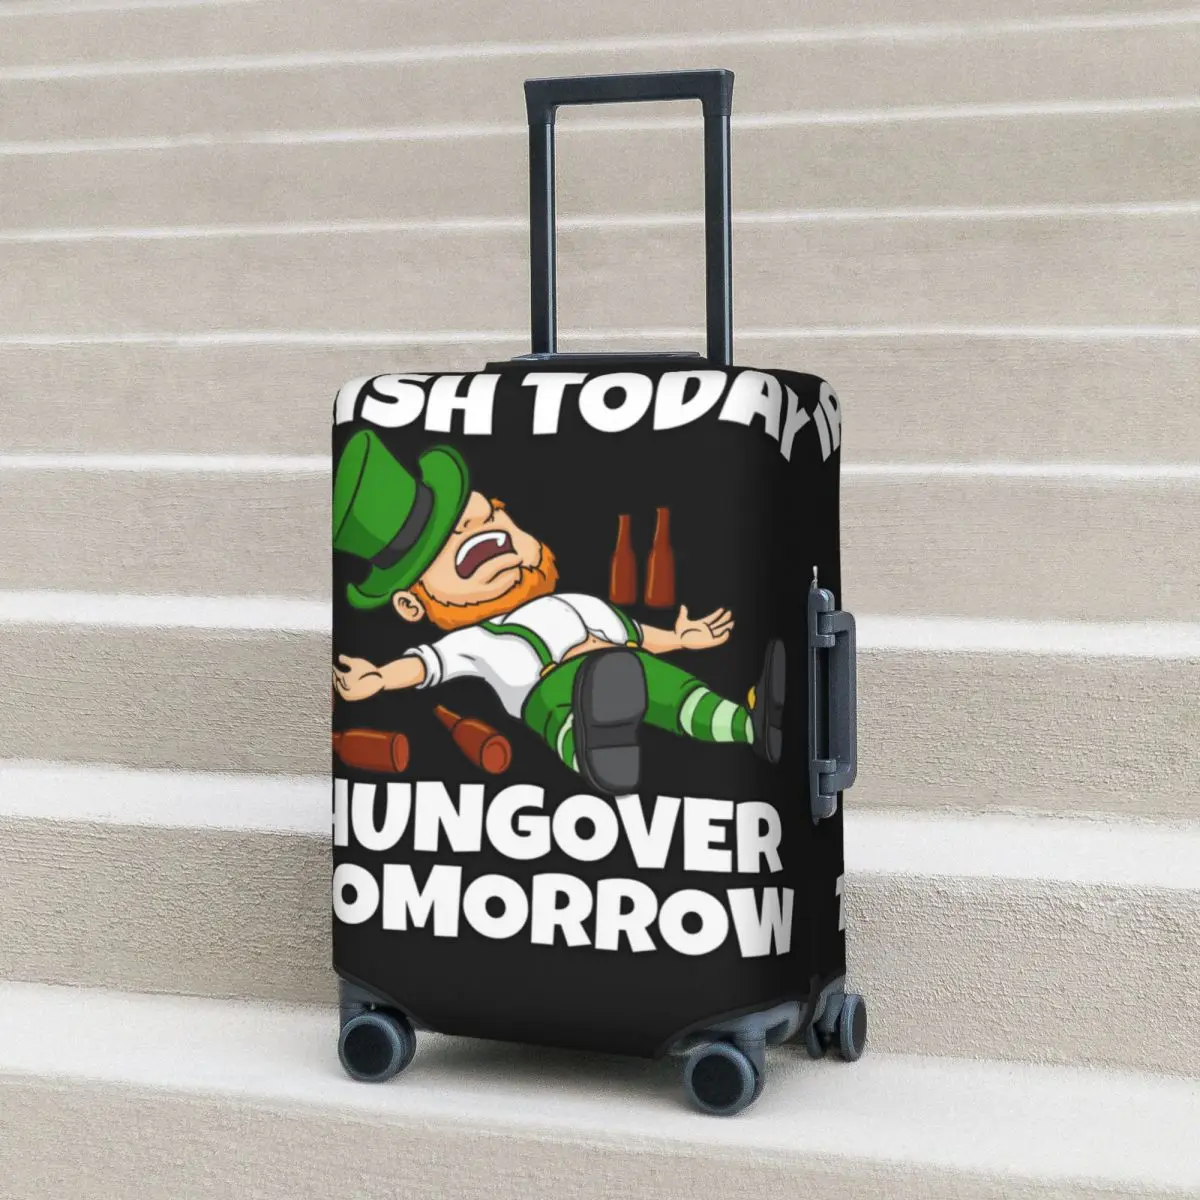 

Irish Today Hungover Tomorrow Suitcase Cover St Patricks Day Flight Travel Practical Luggage Case Protection